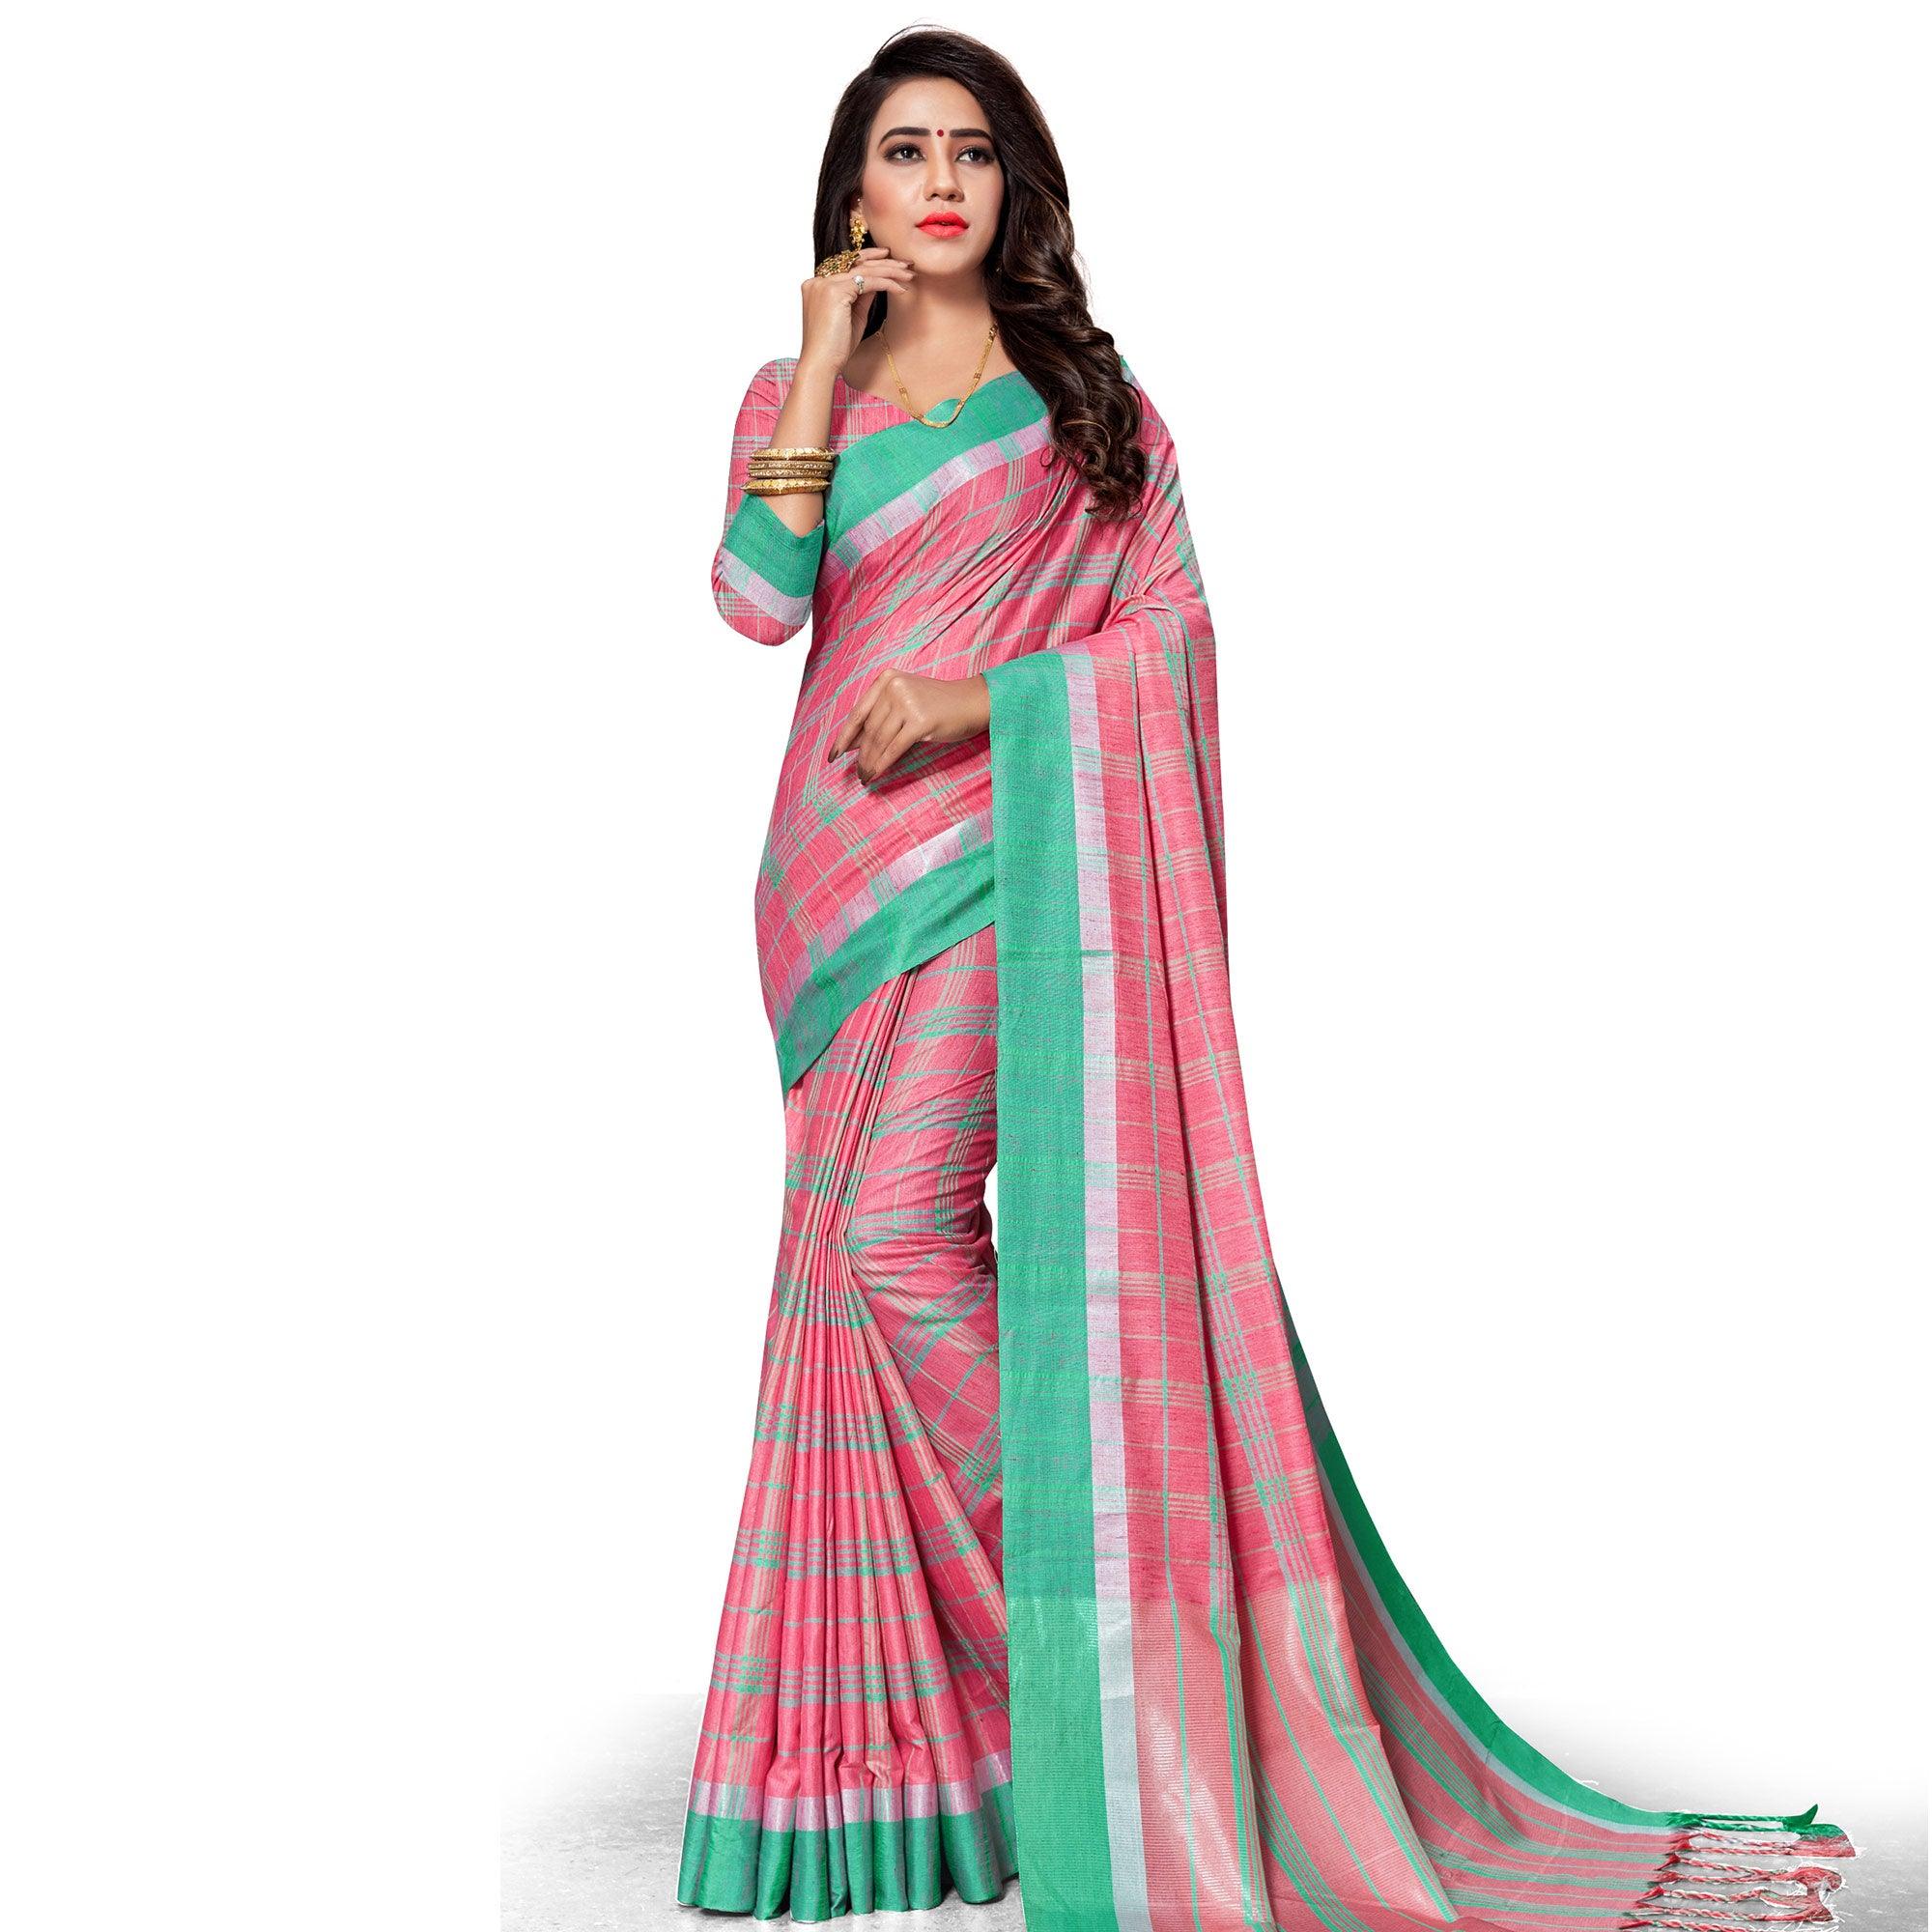 Engrossing Pink Colored Fesive Wear Stripe Print Cotton Silk Saree With Tassels - Peachmode